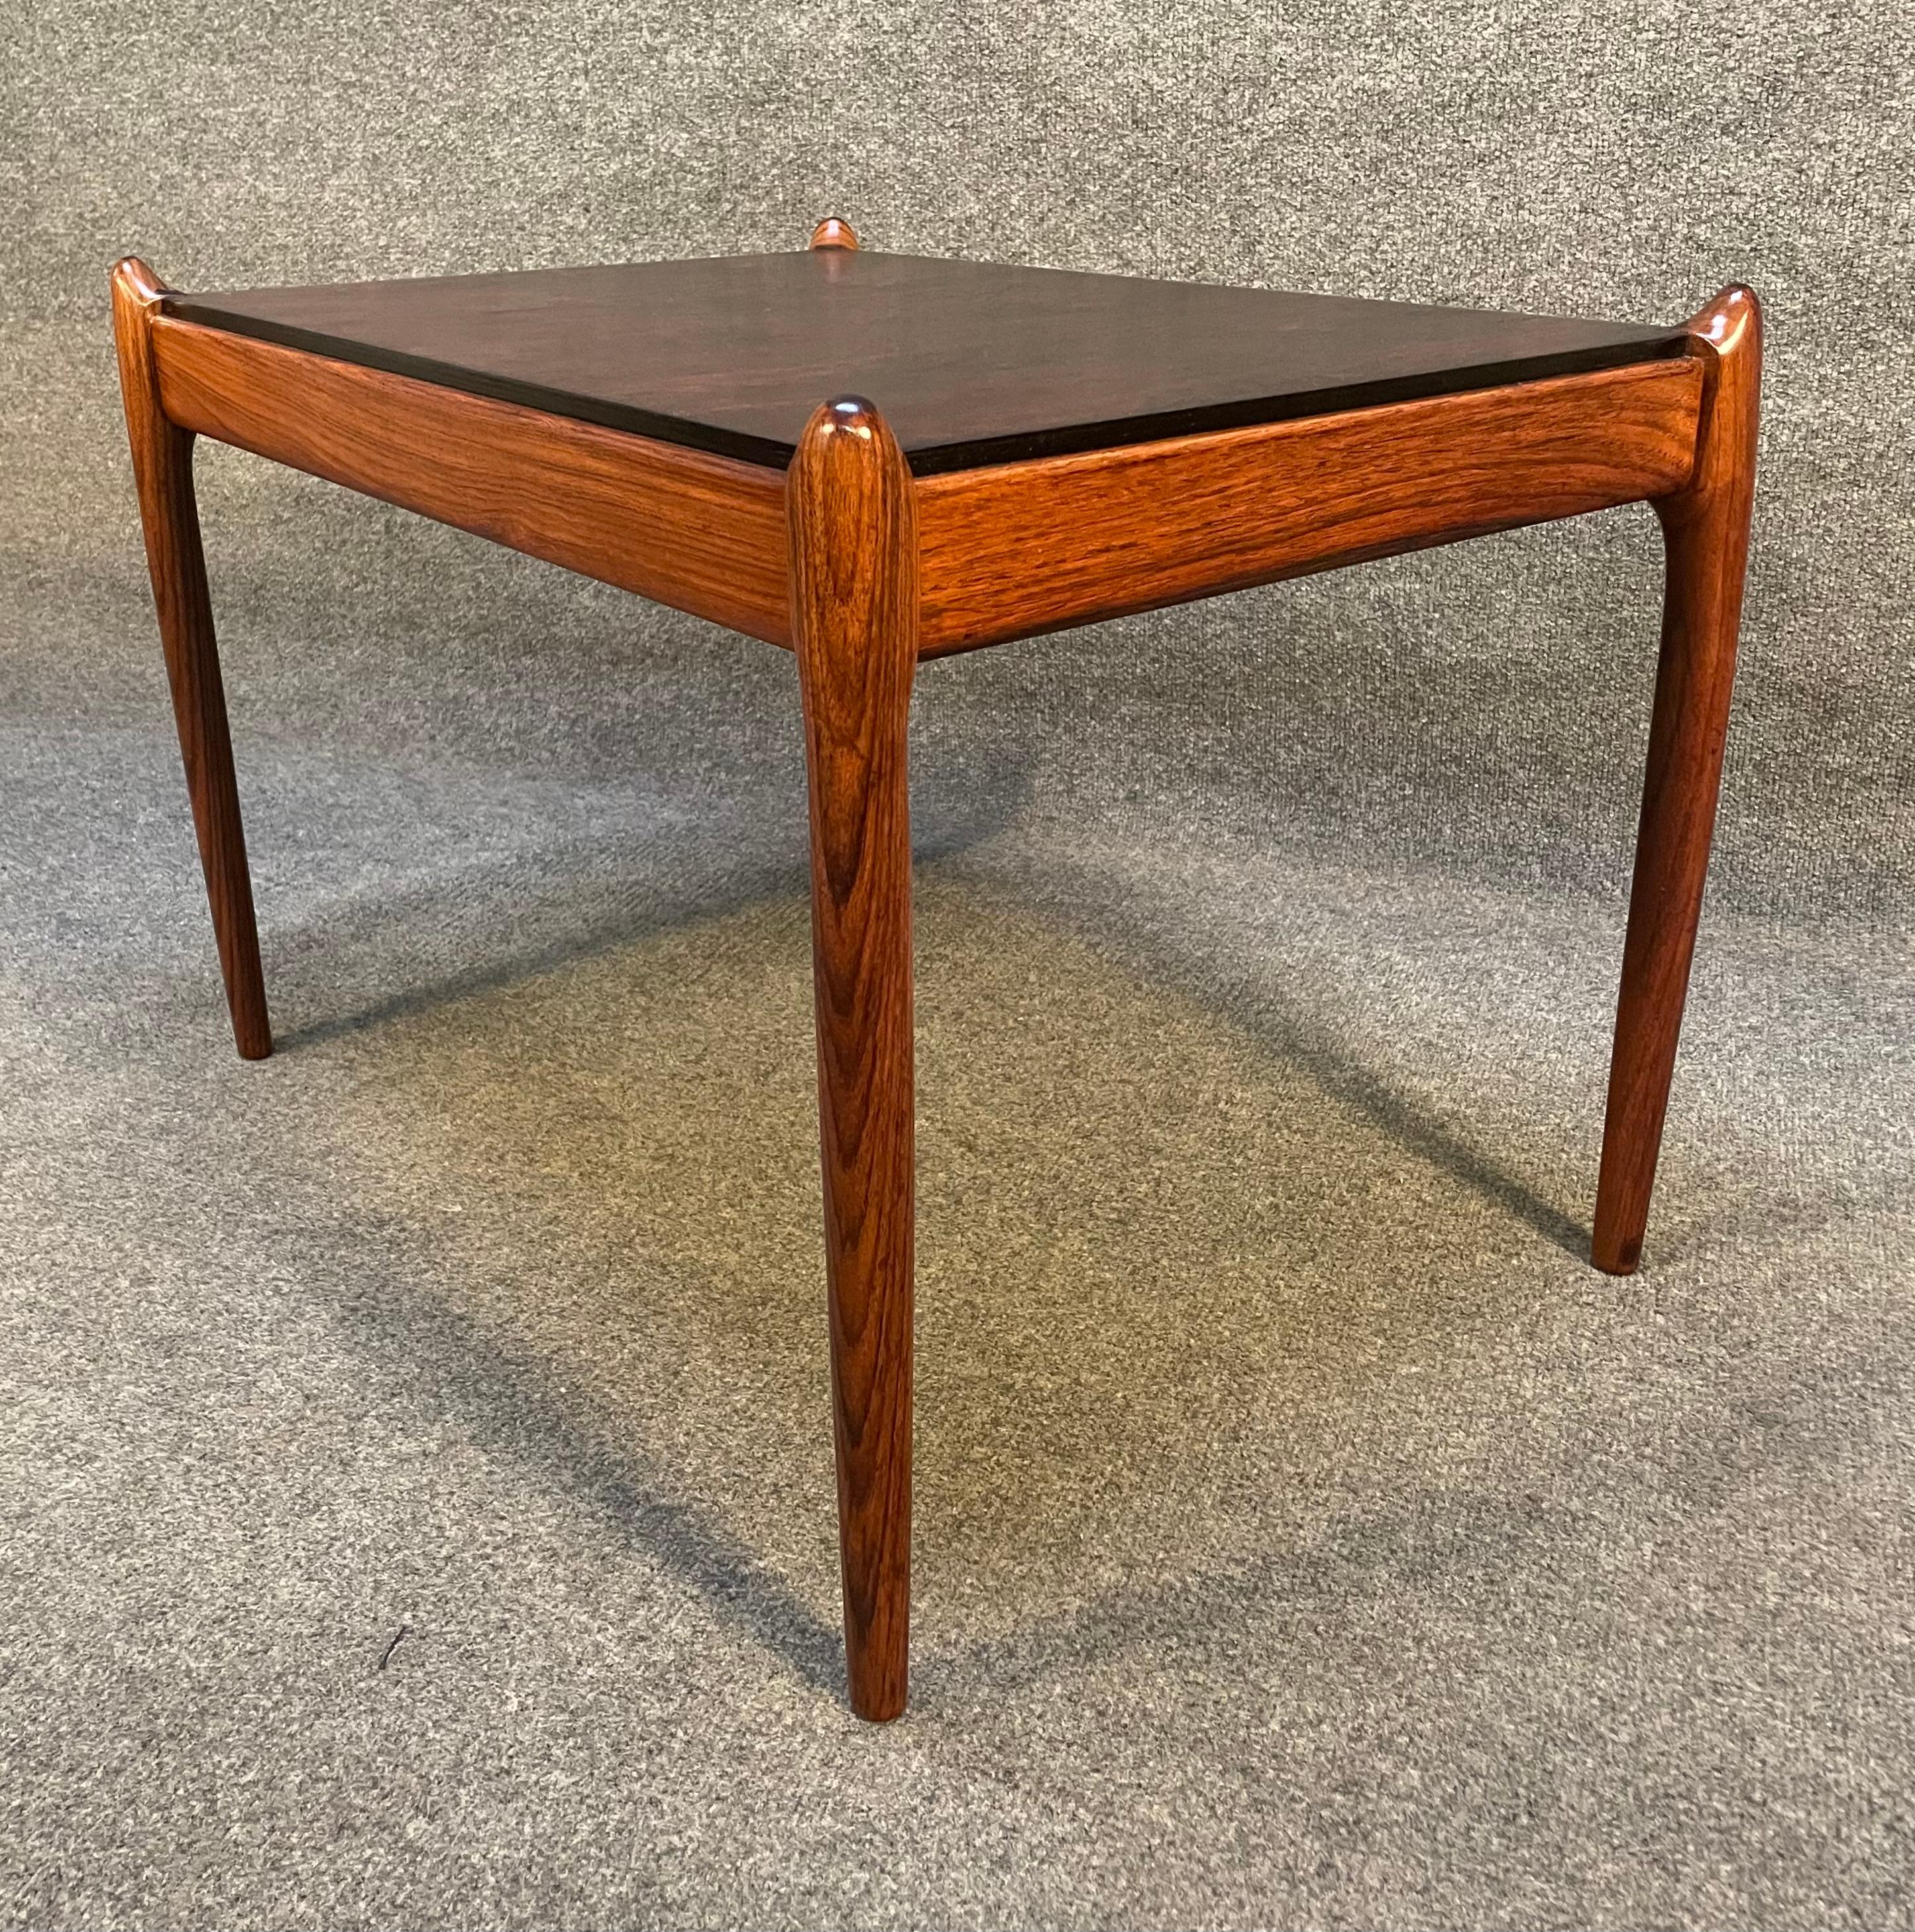 Vintage Danish Midcentury Rosewood Side Table Model 78a by Niels O. Moller In Good Condition For Sale In San Marcos, CA